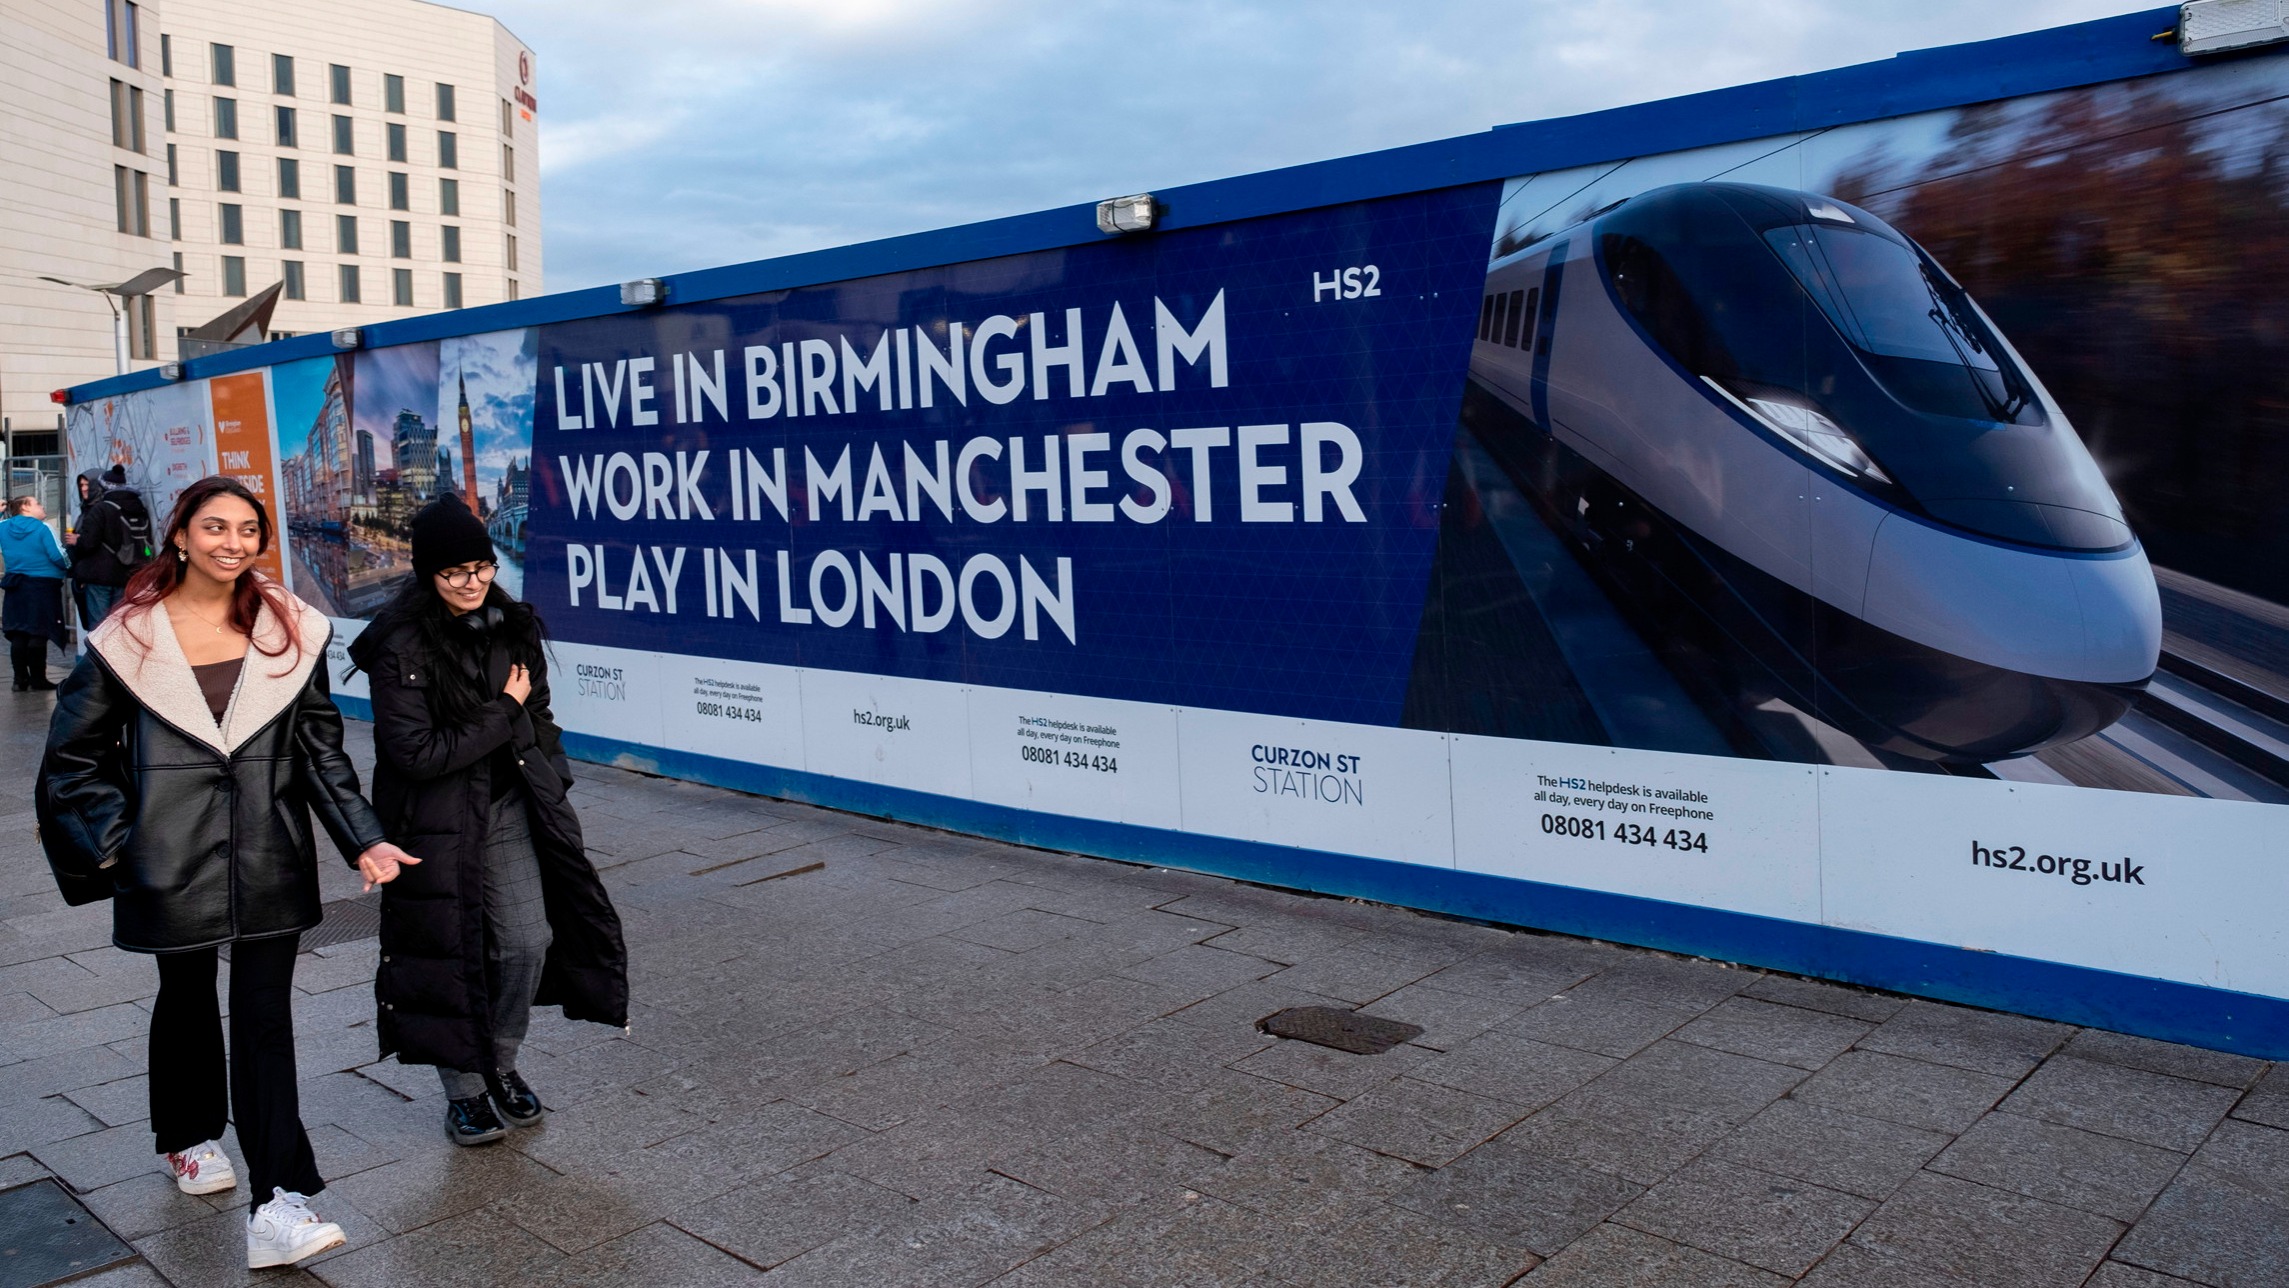 HS2 faces more delays and cuts as UK government seeks to rein in costs |  Financial Times